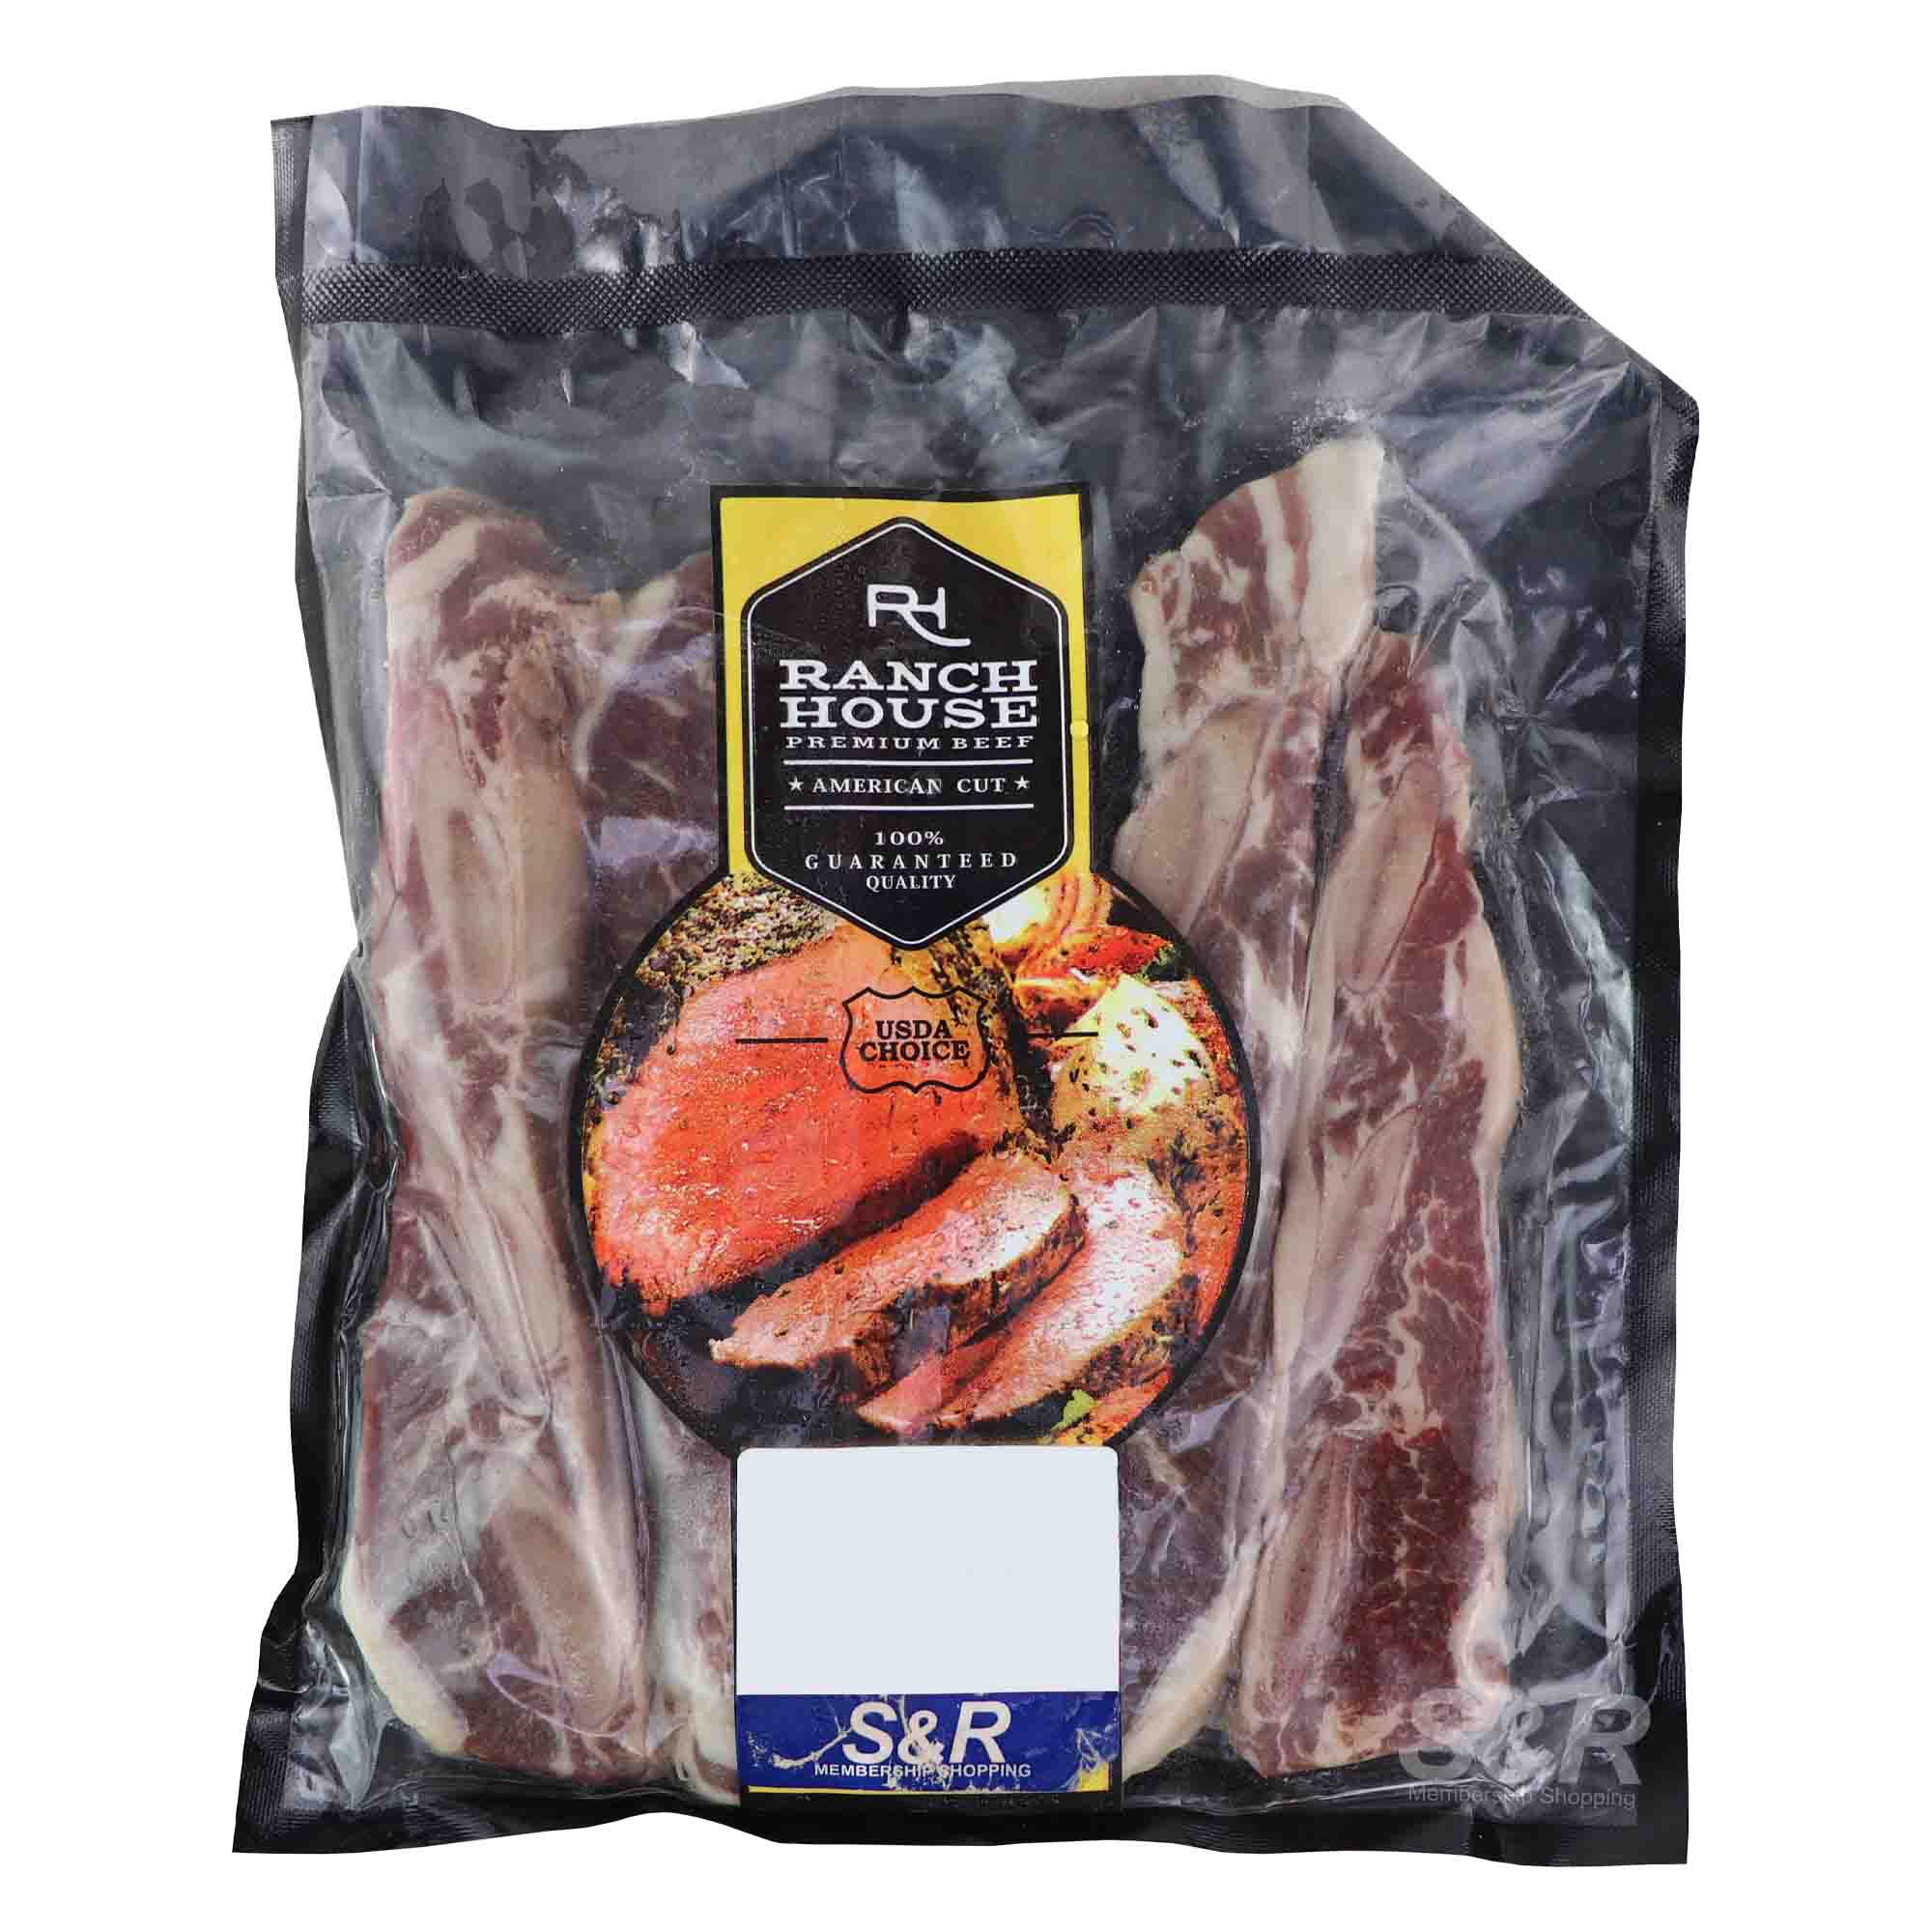 Ranch House Premium Country Style Rib approx. 600g